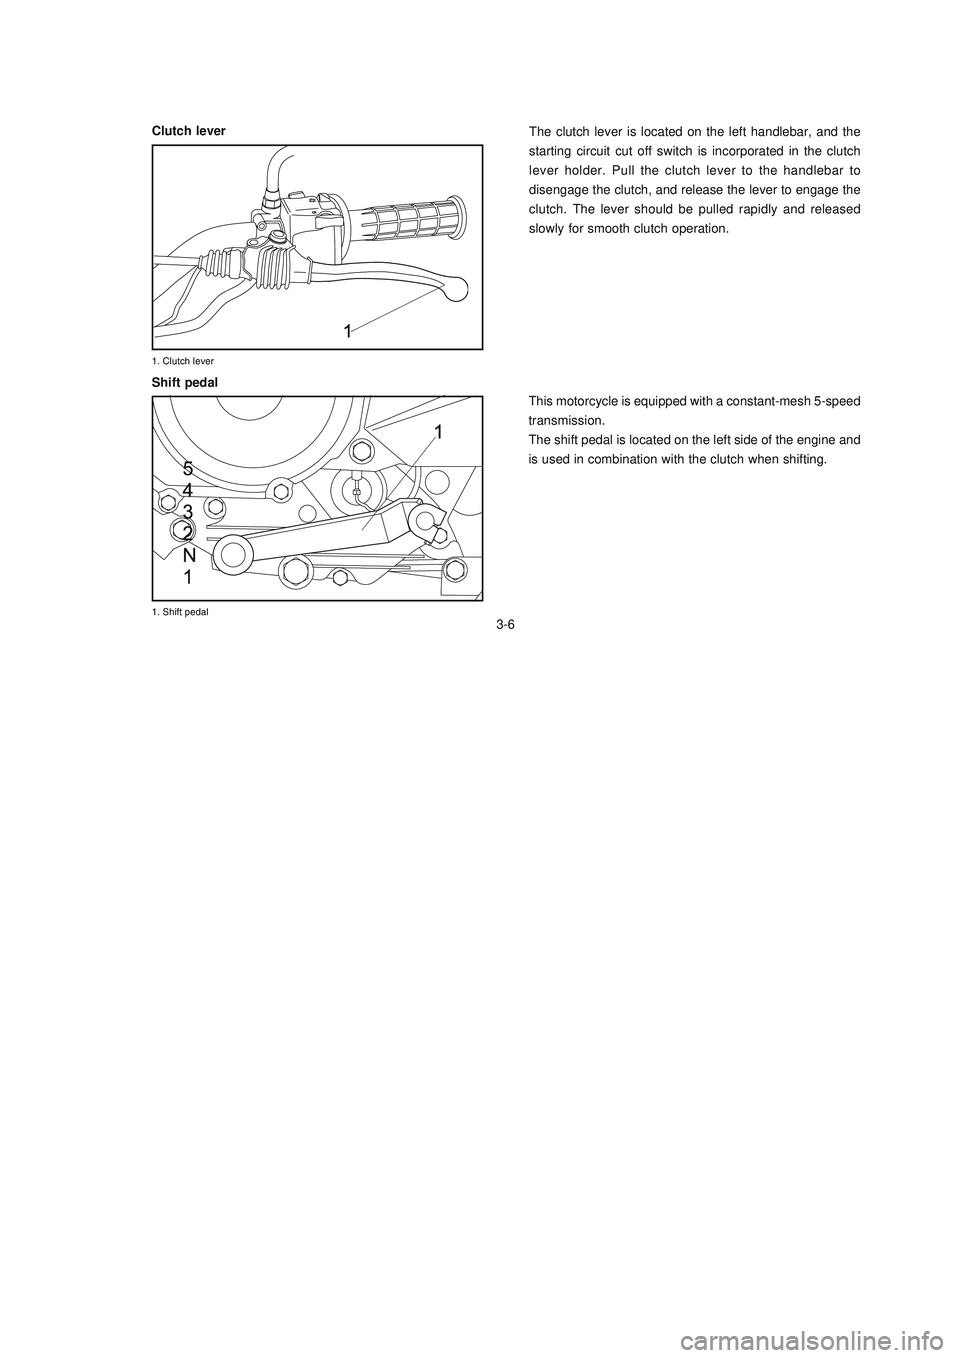 YAMAHA XTZ125 2008  Owners Manual 3-6
3-6
The clutch lever is located on the left handlebar, and the
starting circuit cut off switch is incorporated in the clutch
lever holder. Pull the clutch lever to the handlebar to
disengage the c